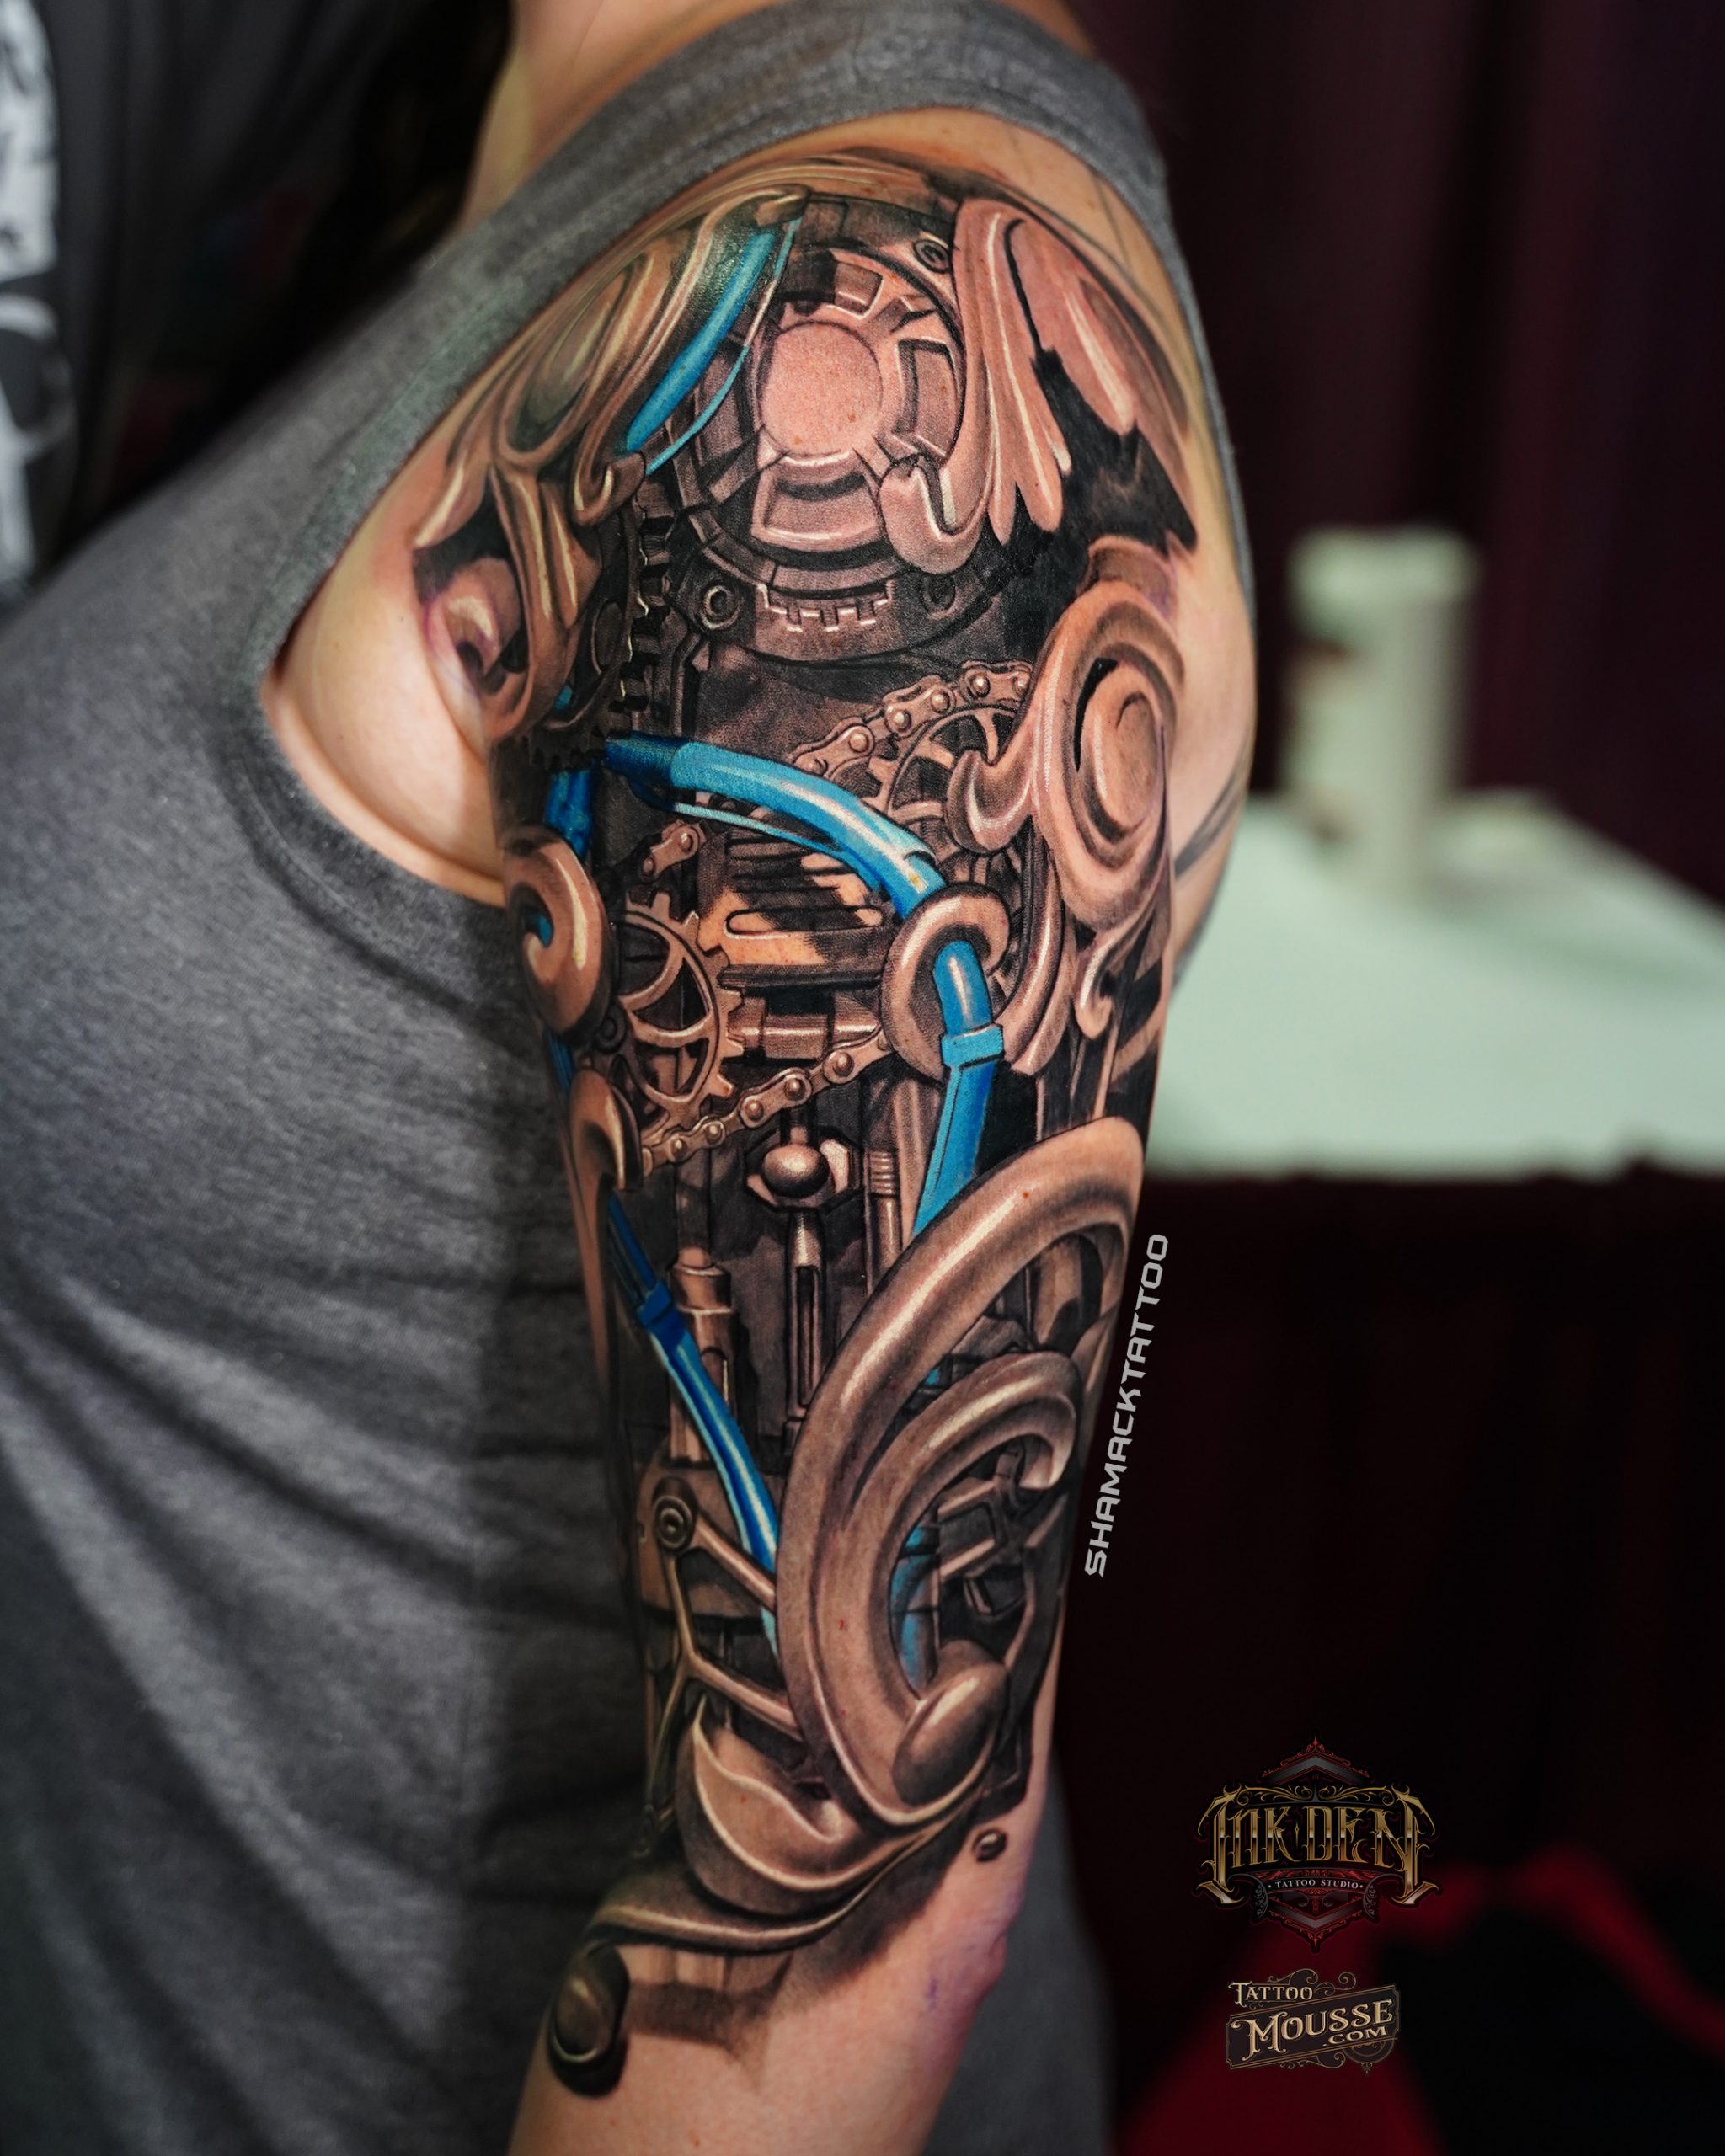 Bhavesh Kalma - Biomechanical tattoos are one of the most popular  contemporary tattoo art movements. As indicated by the name, they involve a  combination of organic elements and mechanical pieces – a